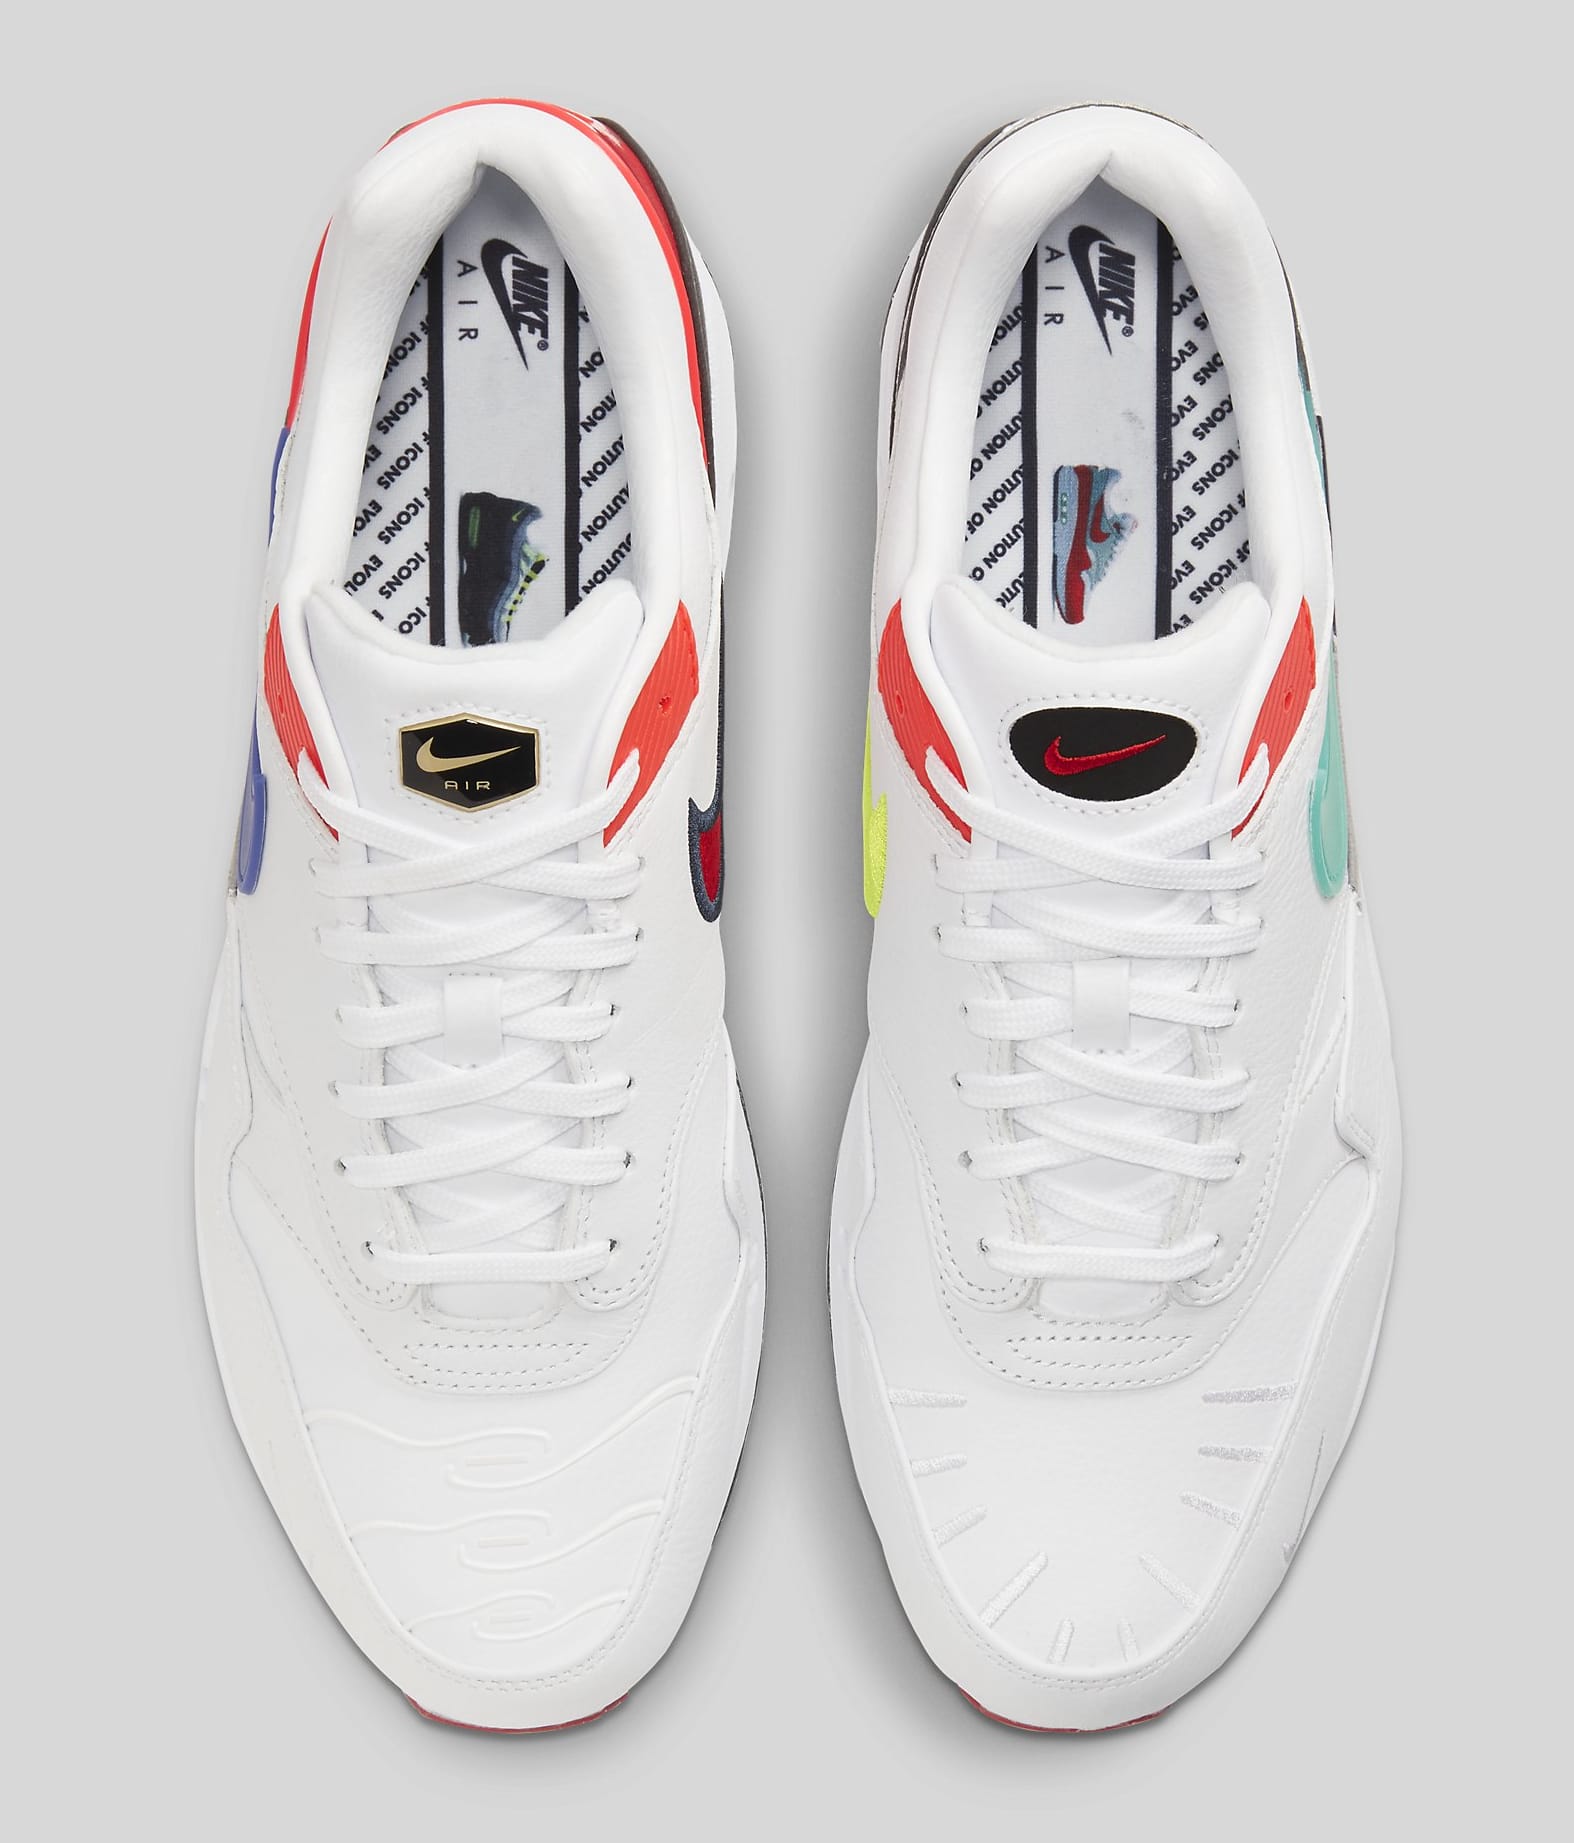 Nike Air Max 1 &#x27;Evolutions of Icons&#x27; CW6541-100 Top